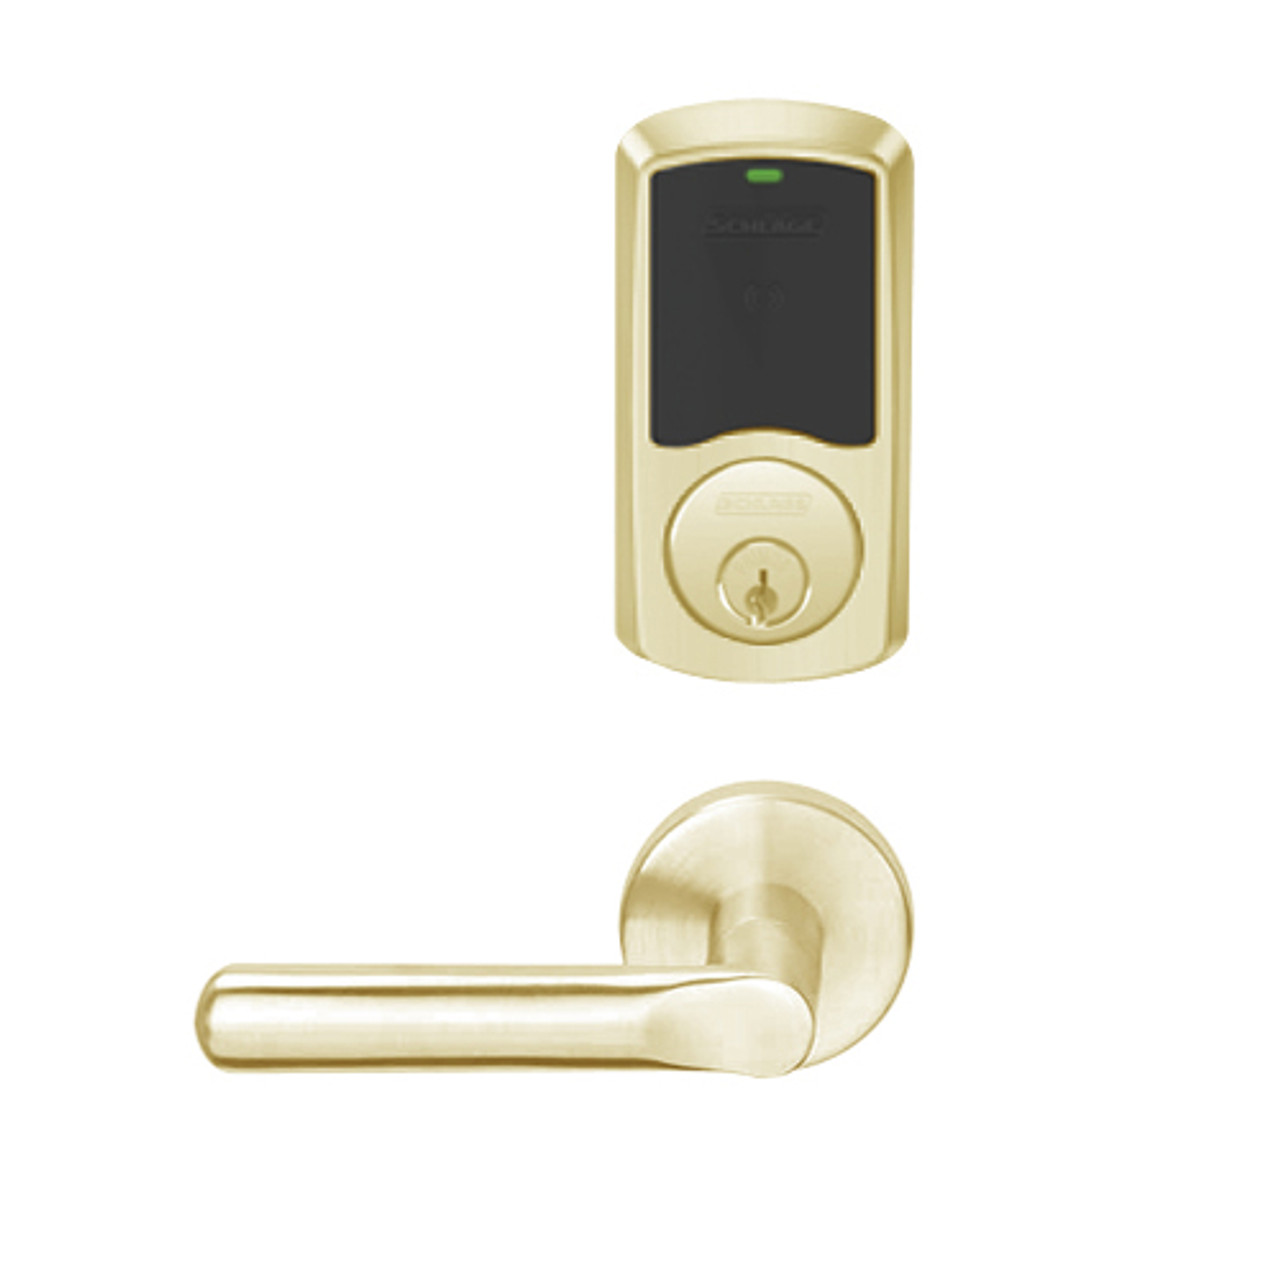 LEMD-GRW-P-18-606-00A Schlage Privacy/Apartment Wireless Greenwich Mortise Deadbolt Lock with LED and 18 Lever in Satin Brass